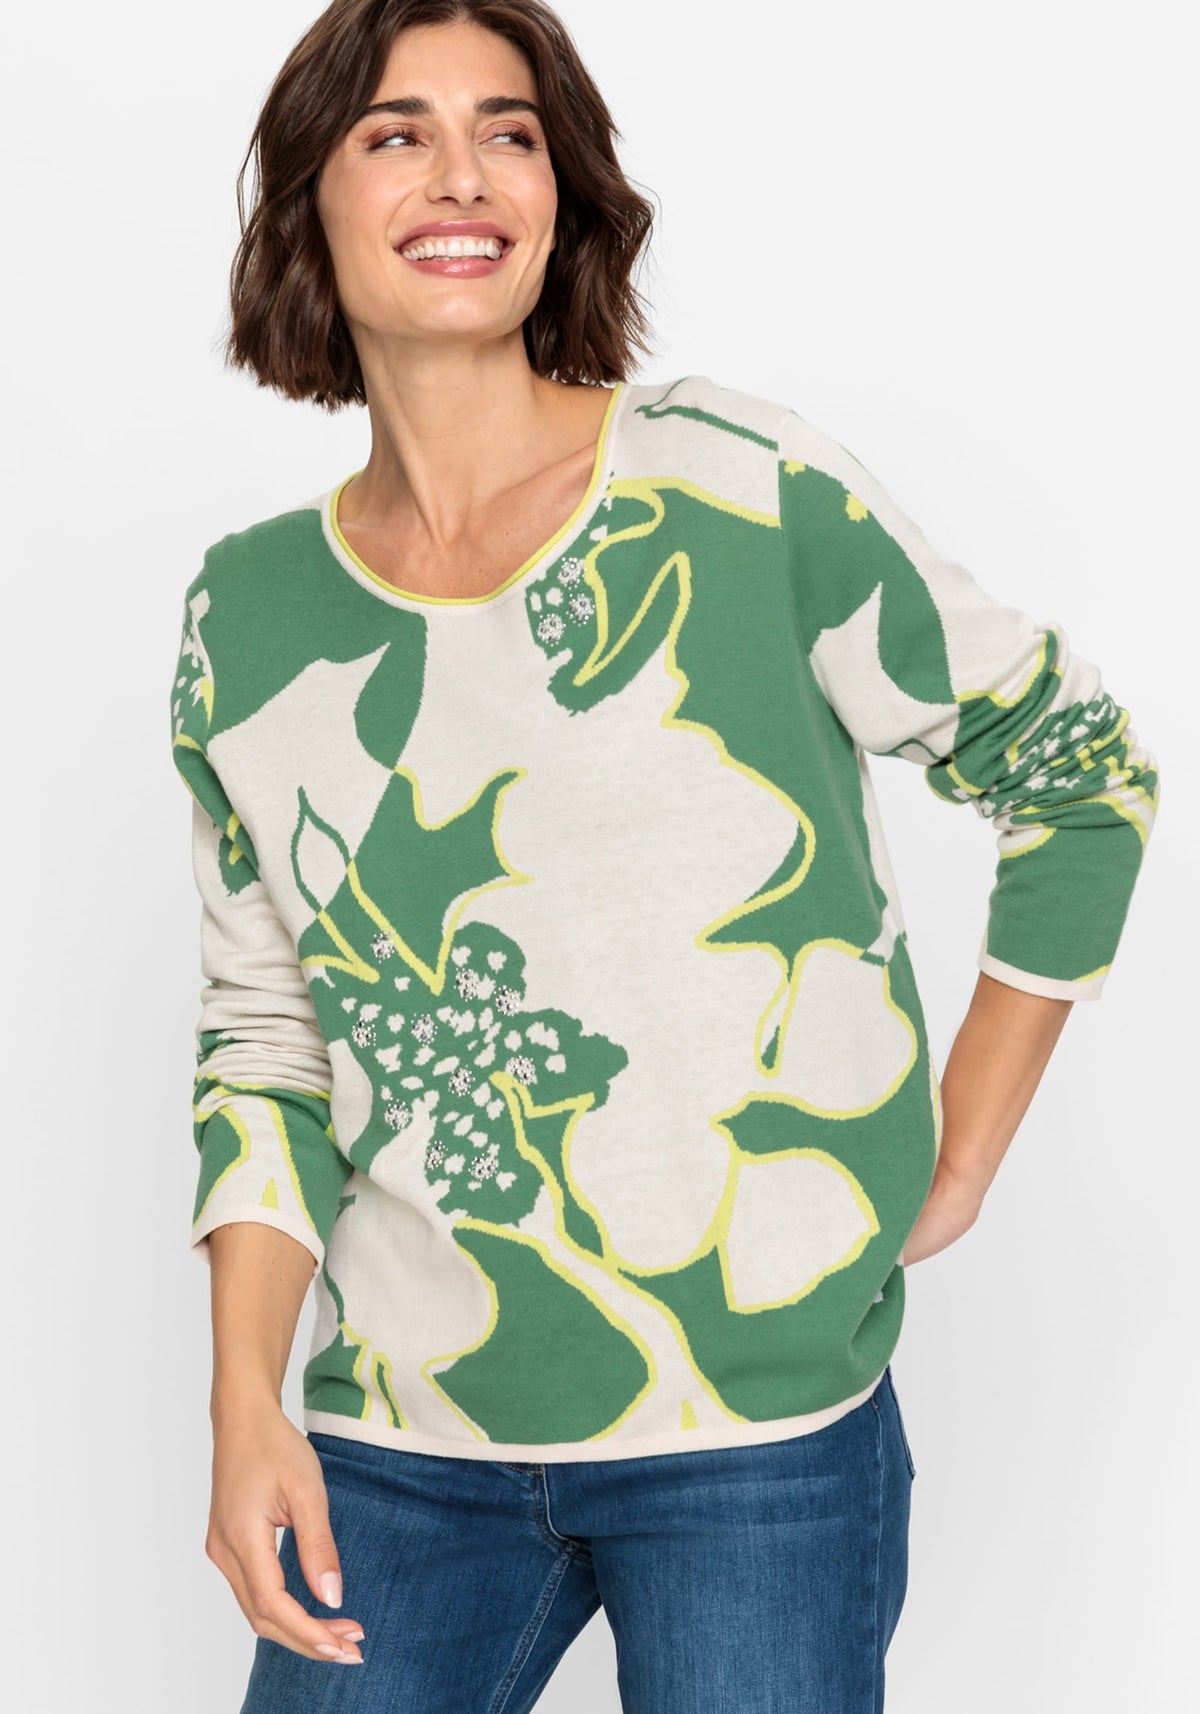 Cotton Blend Long Sleeve Floral Pullover